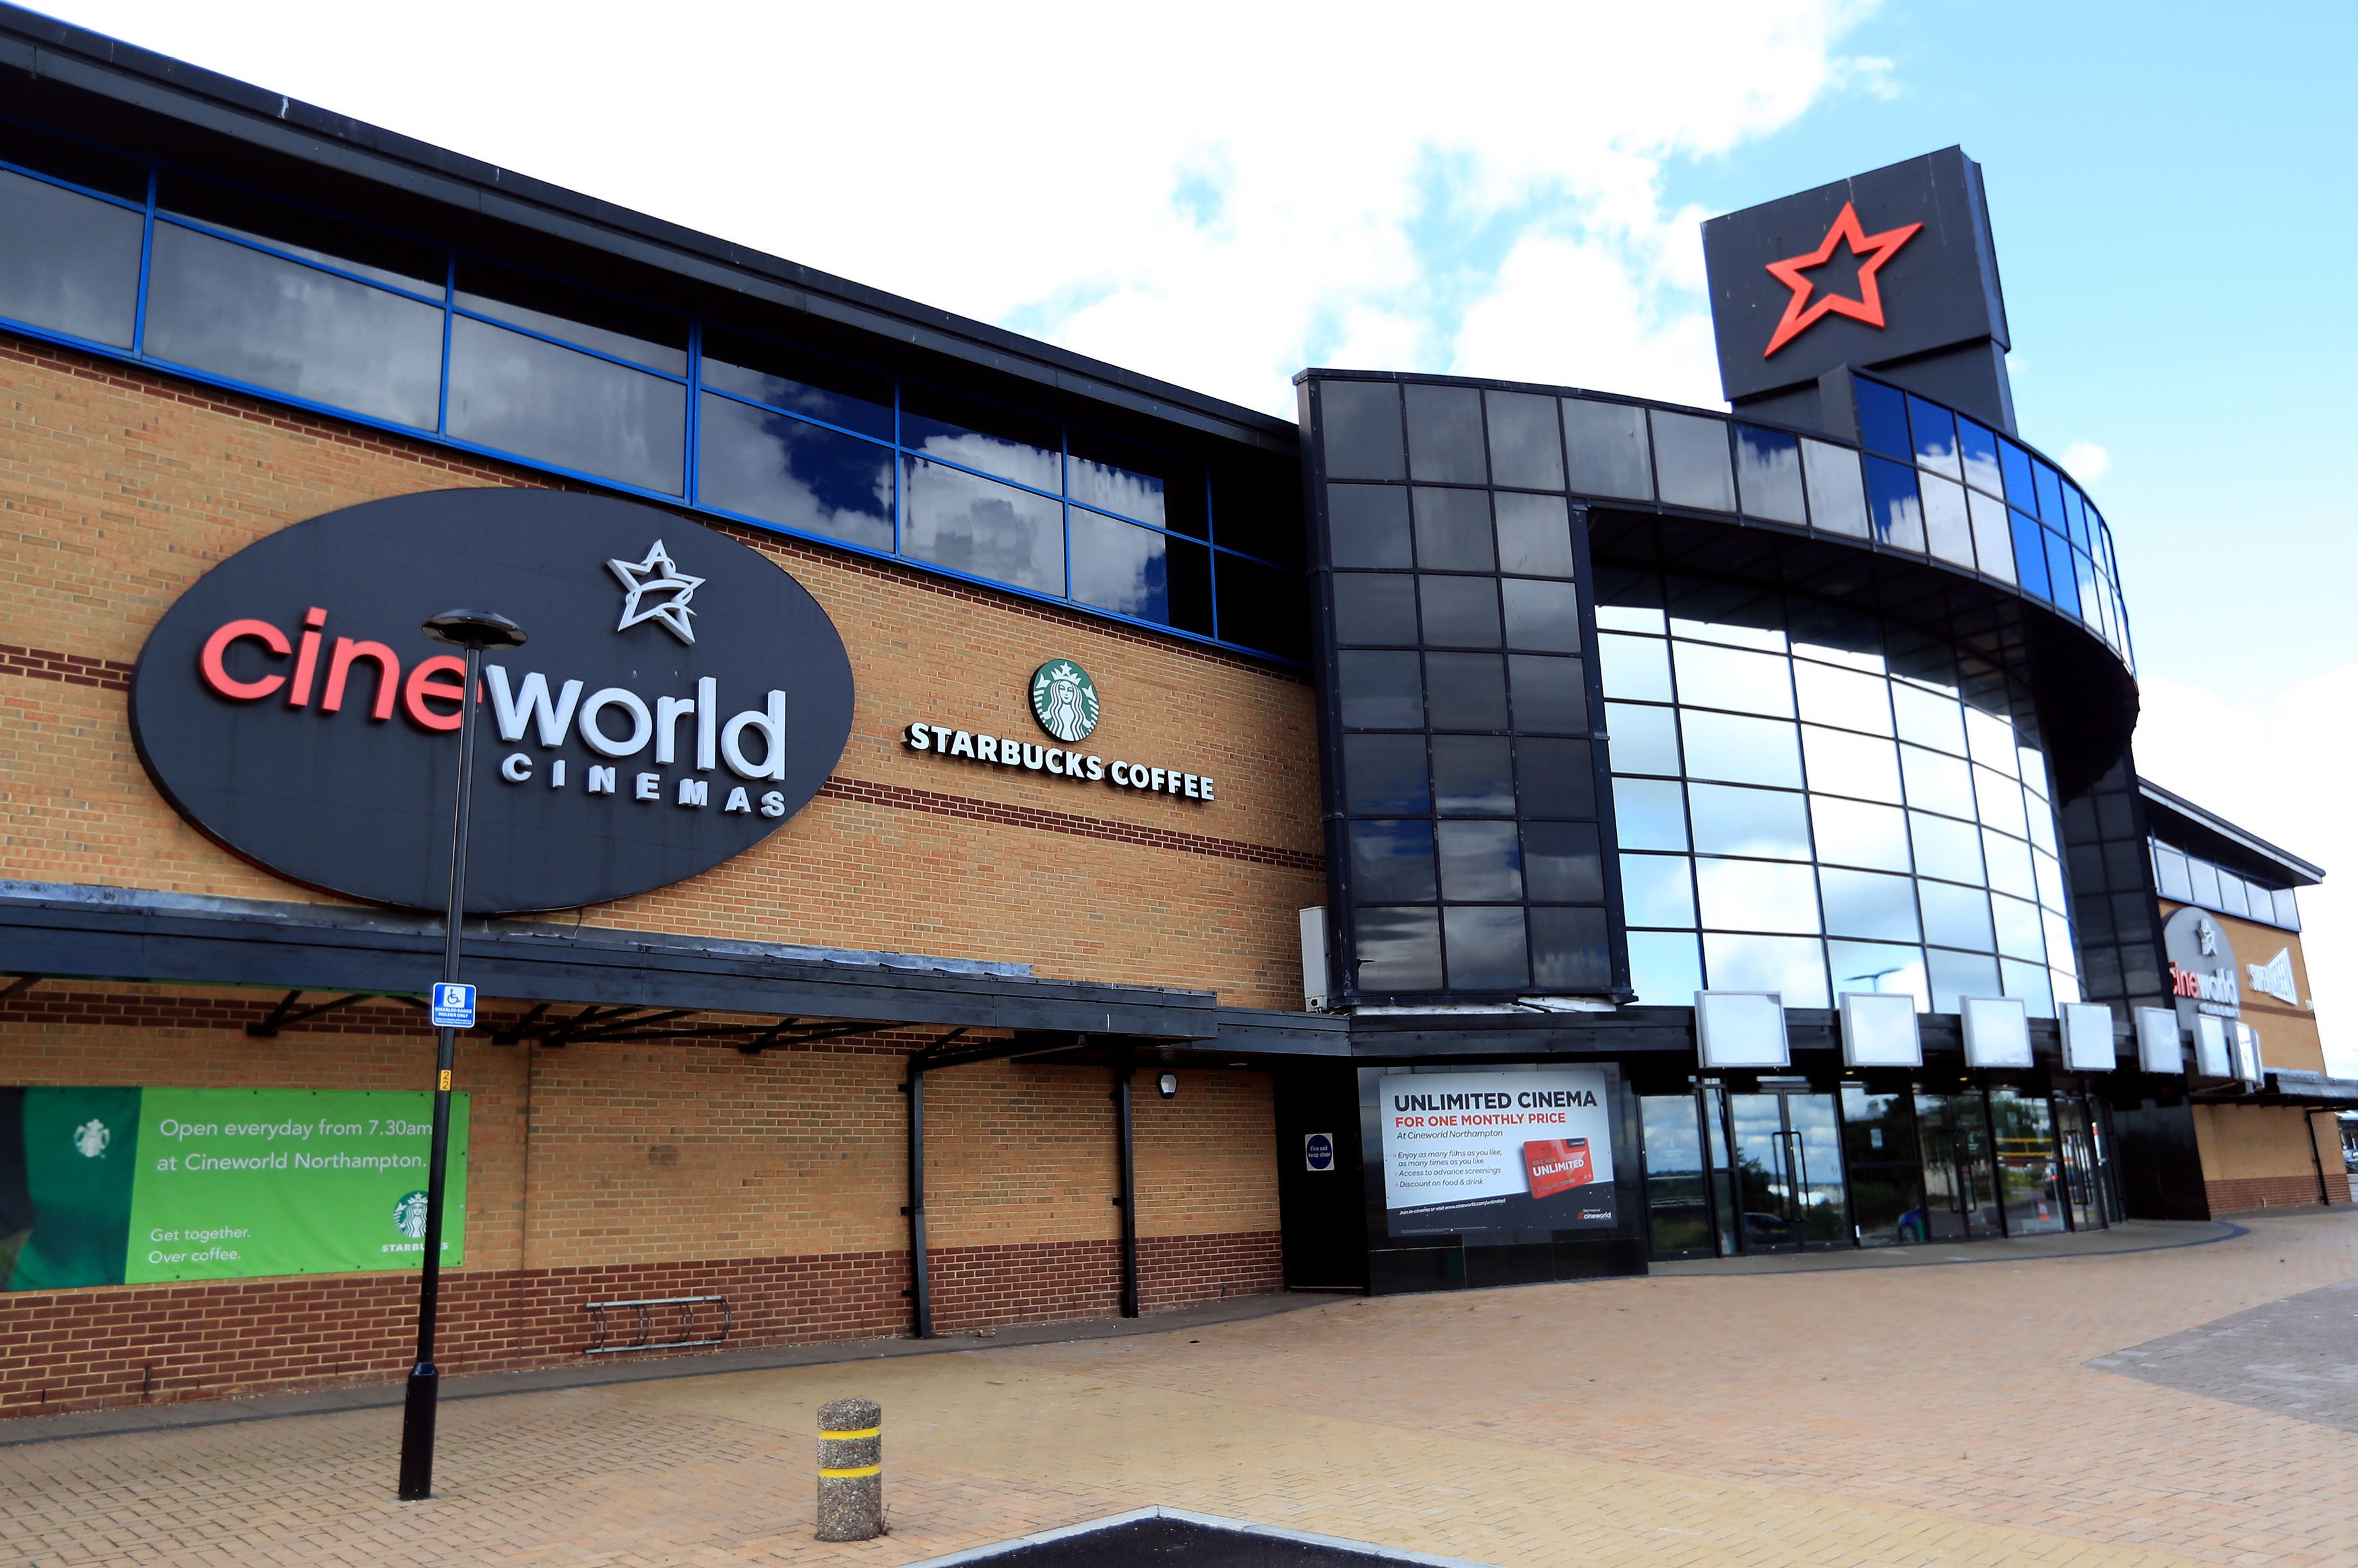 Cineworld staff are seeking official word from the company about their job security